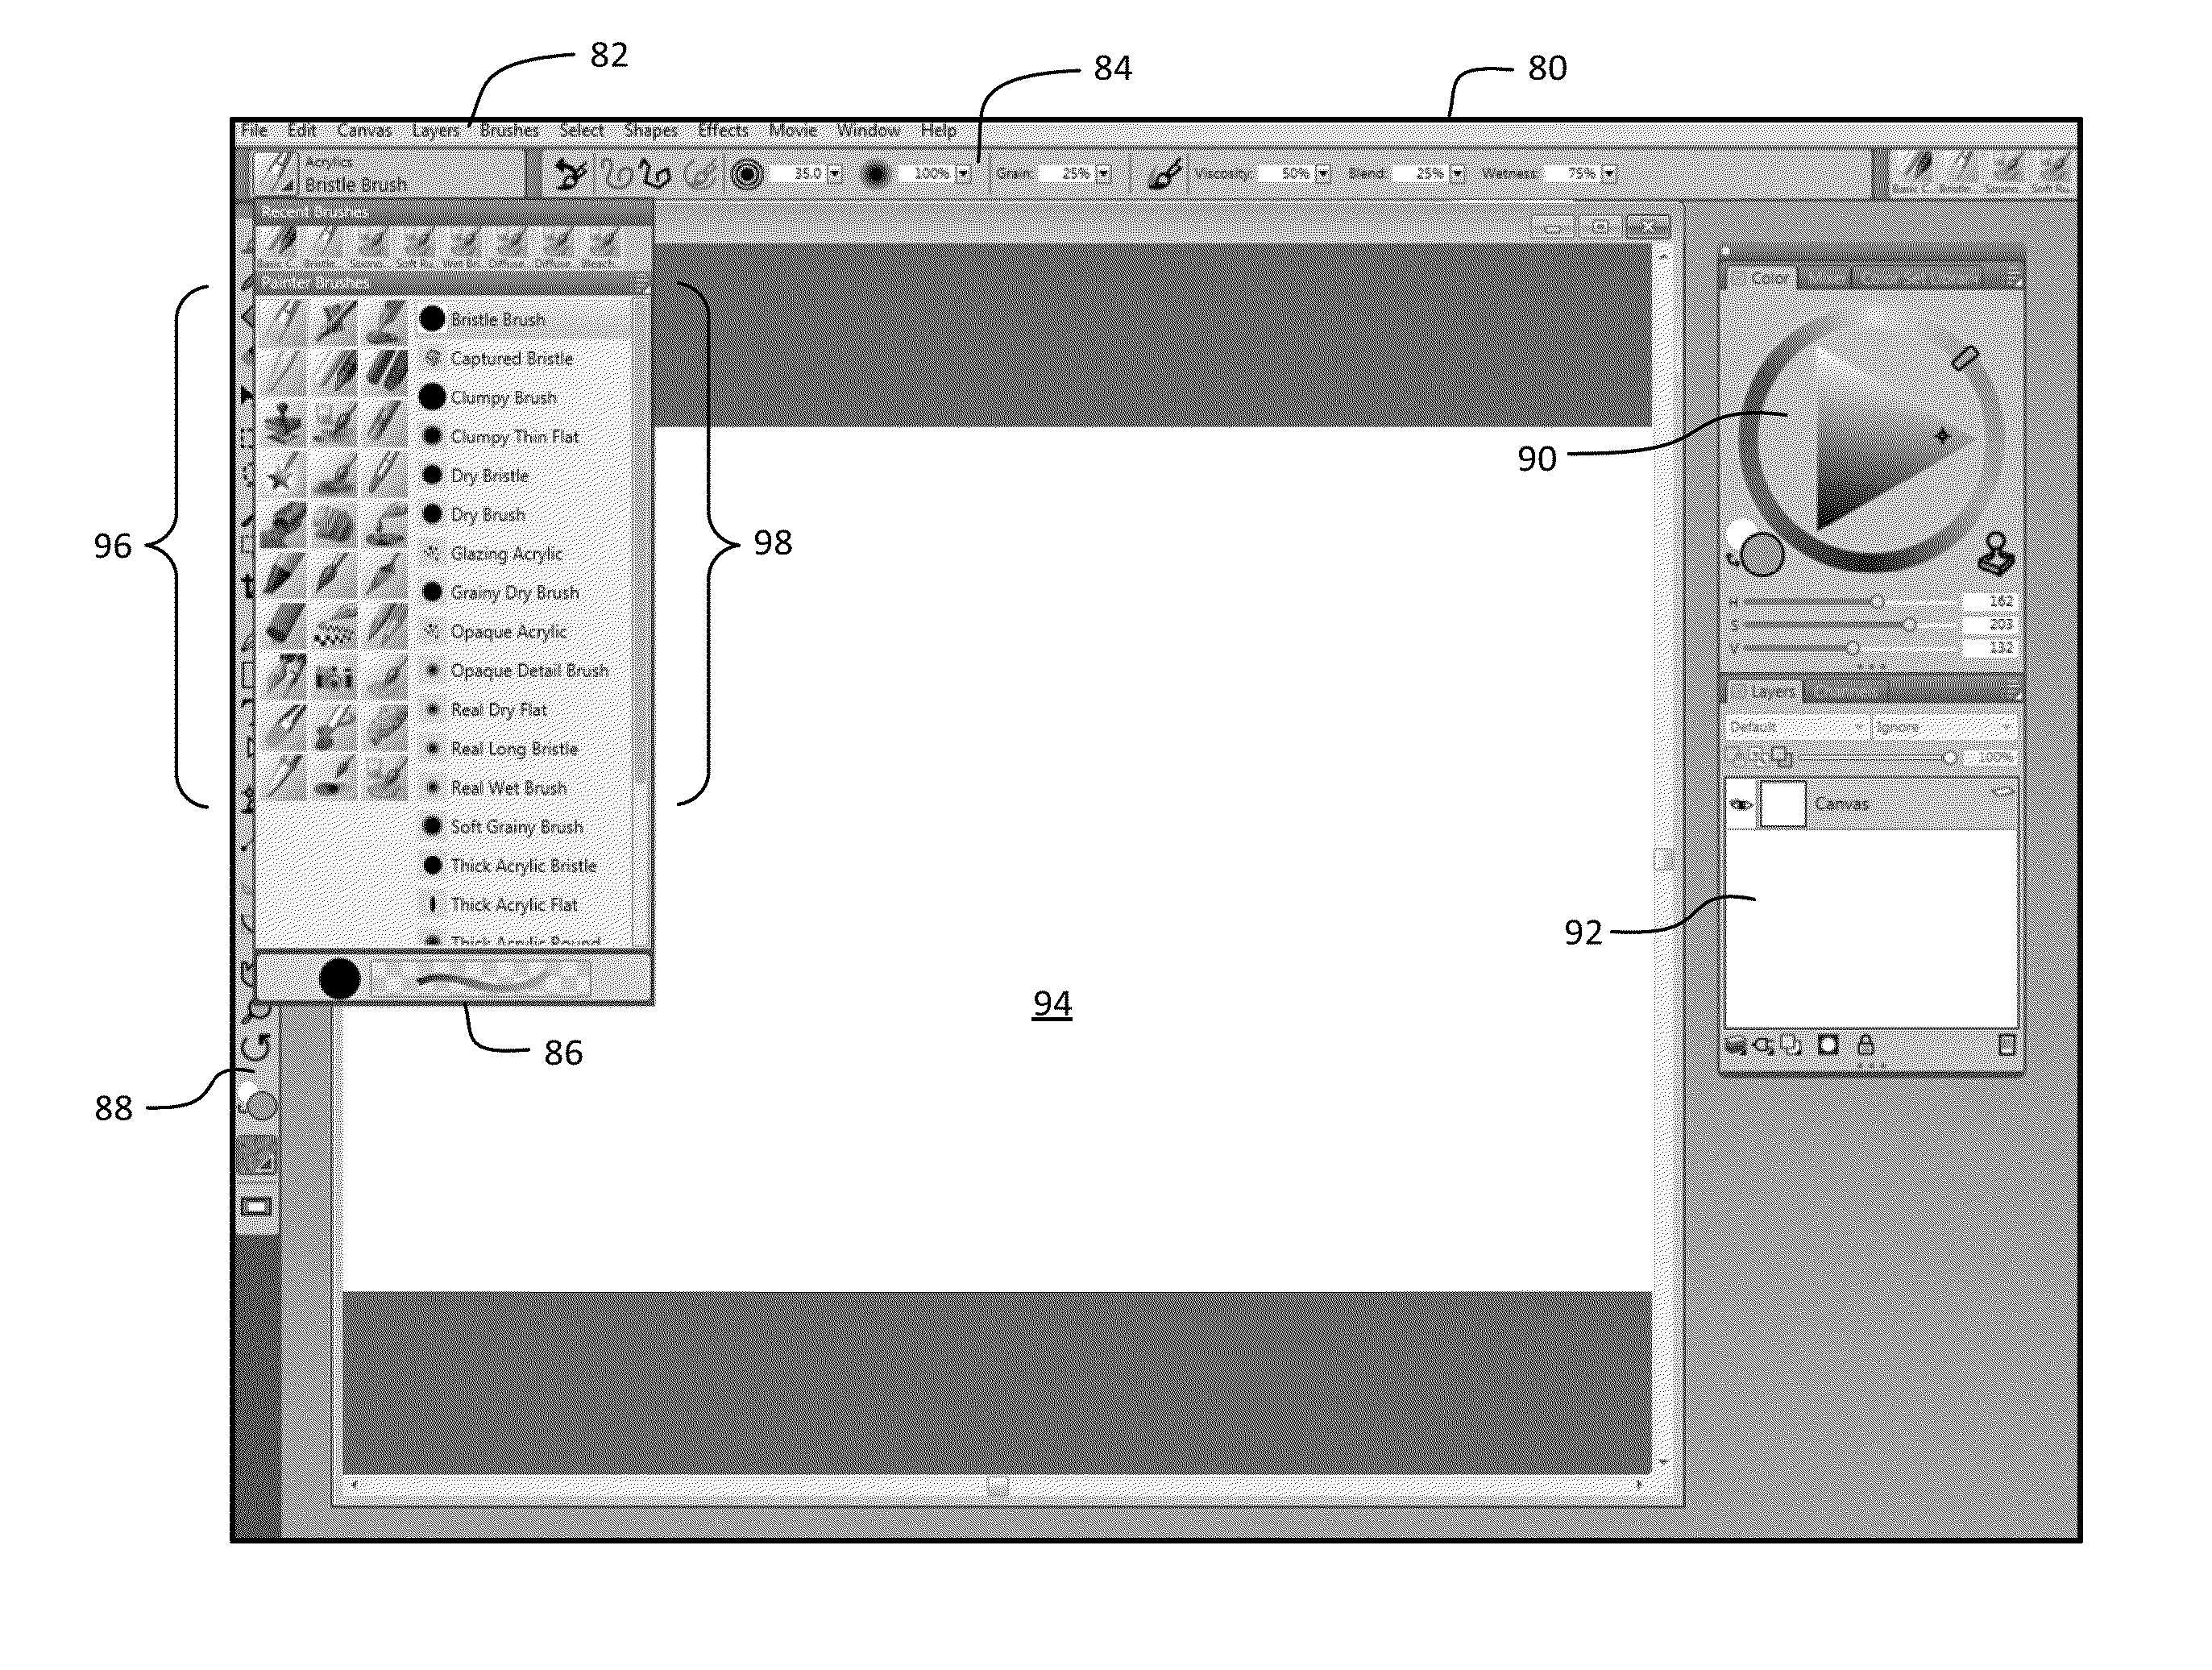 Dynamic tool control in a digital graphics system using a vision system